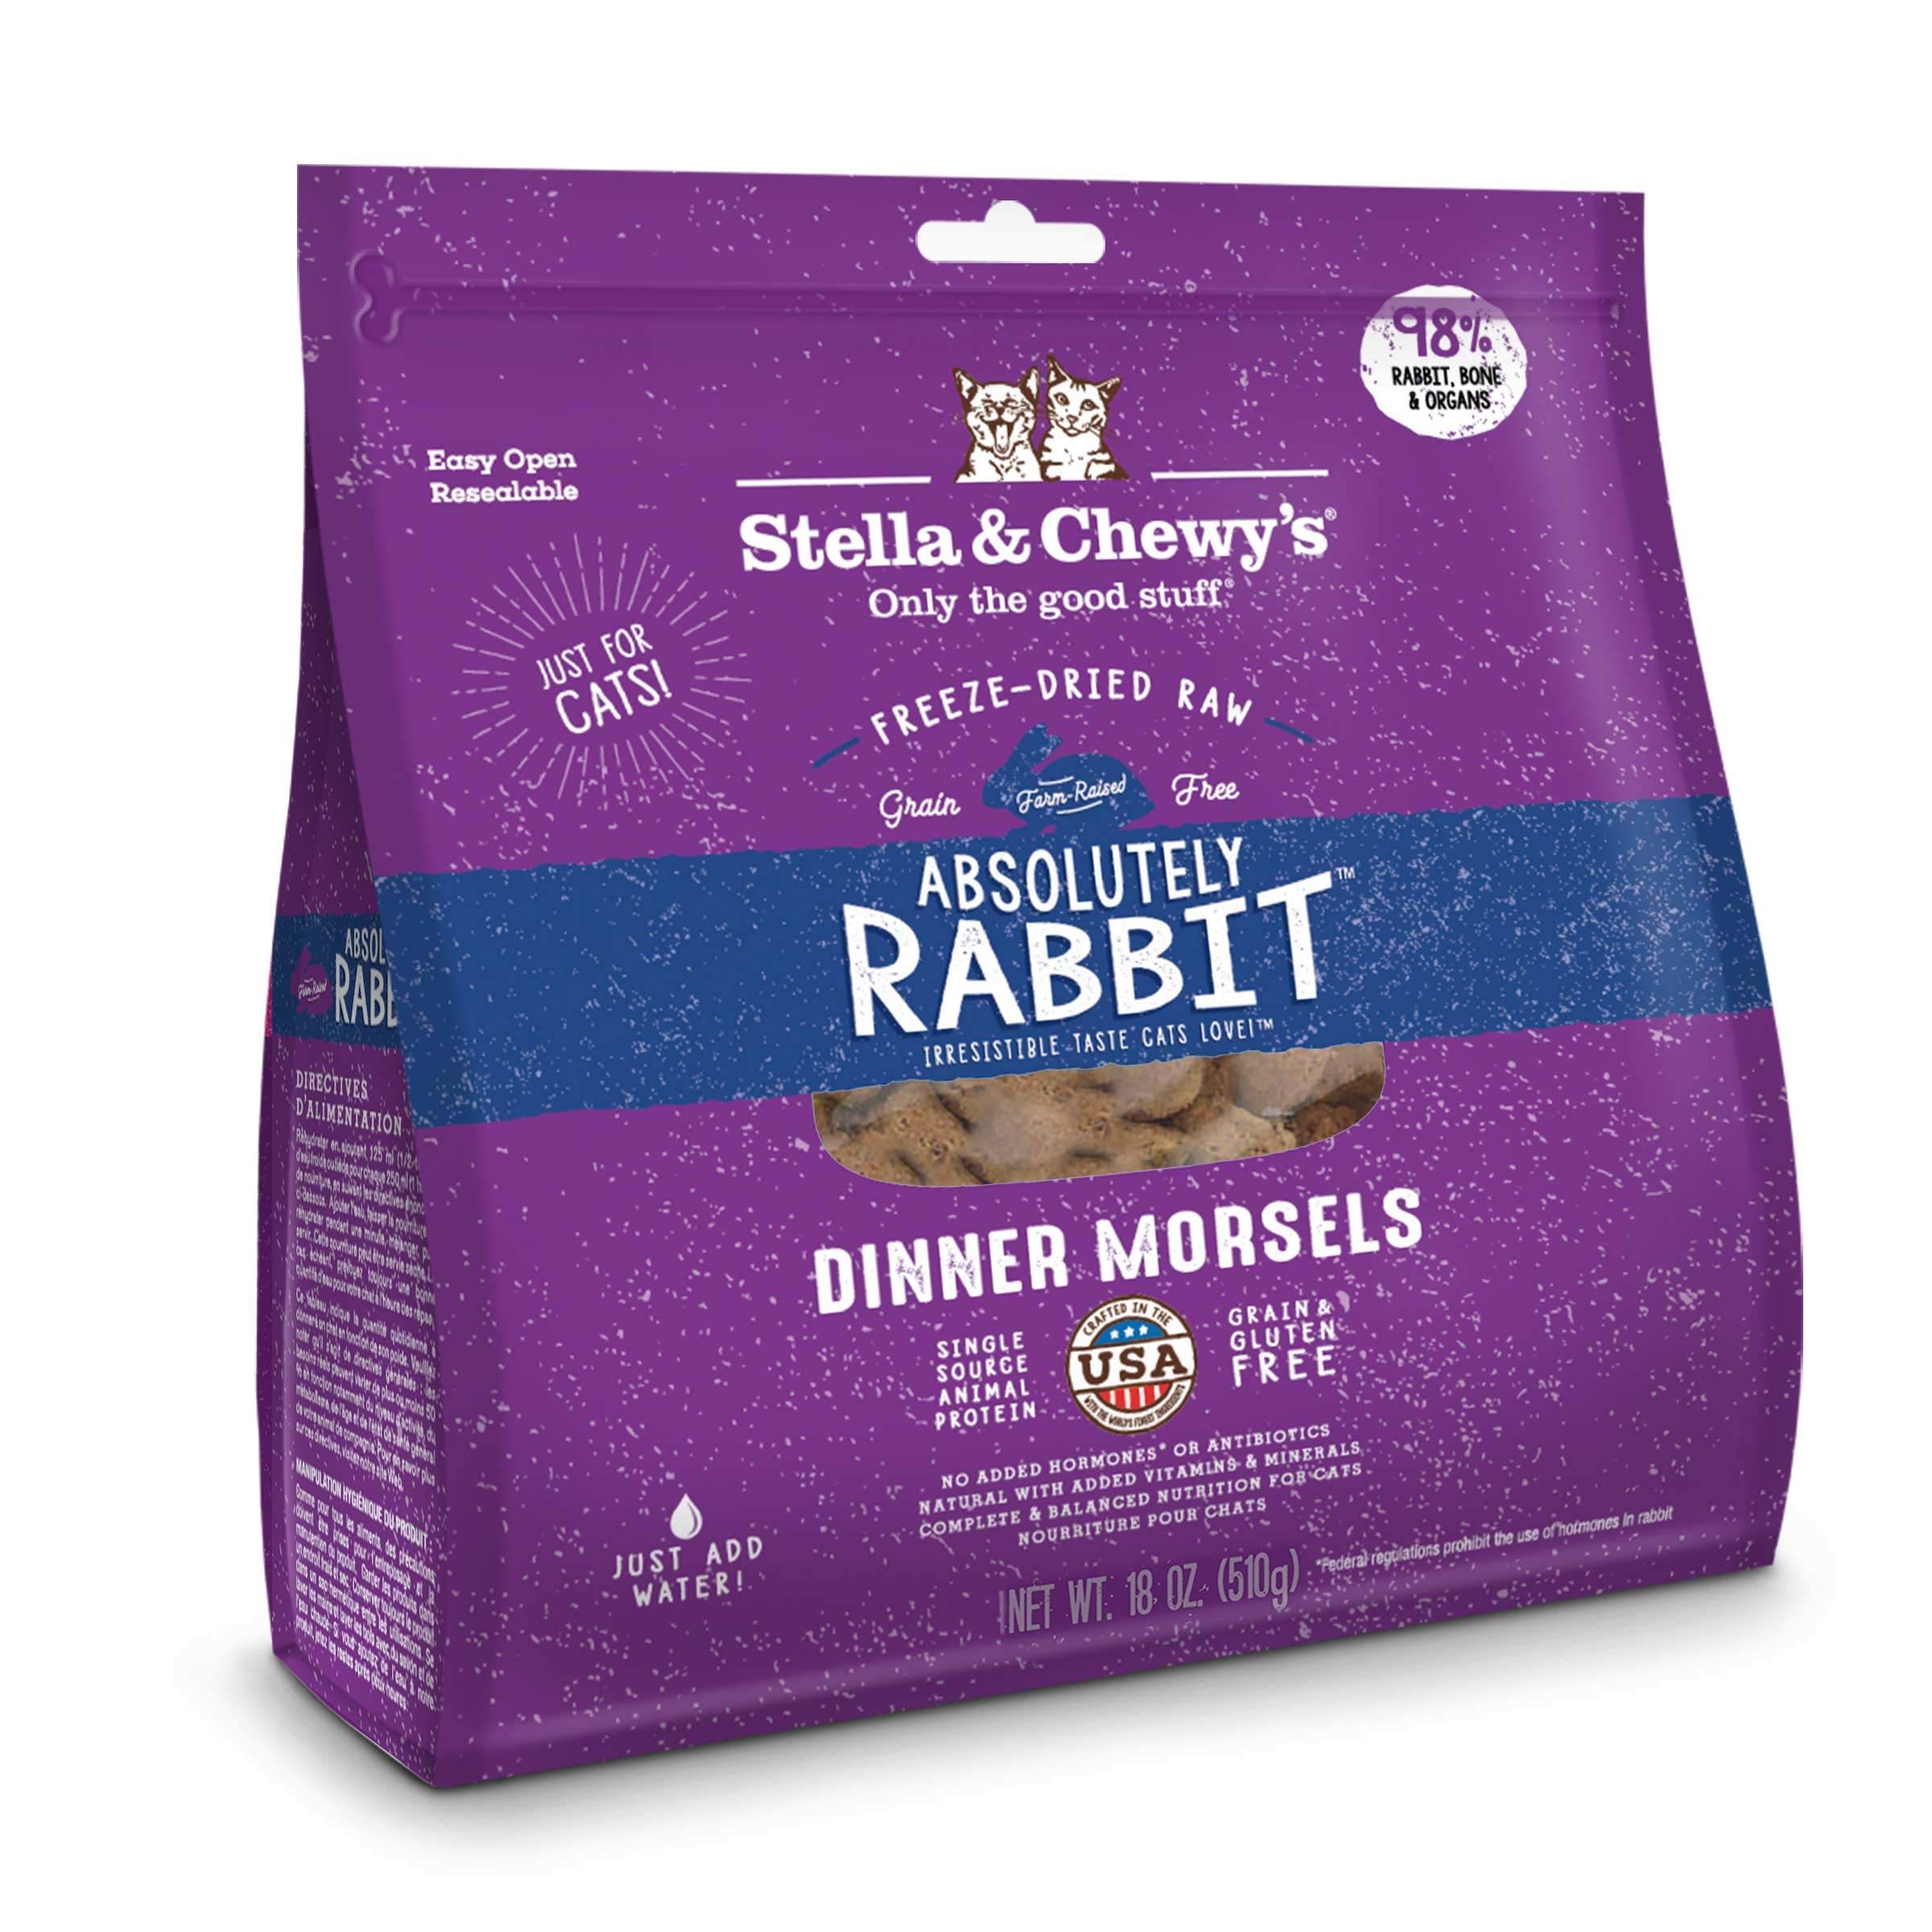 Stella & Chewy's - Absolutely Rabbit Dinner Morsels Freeze-Dried Raw (Cat Food) 510g (18oz)